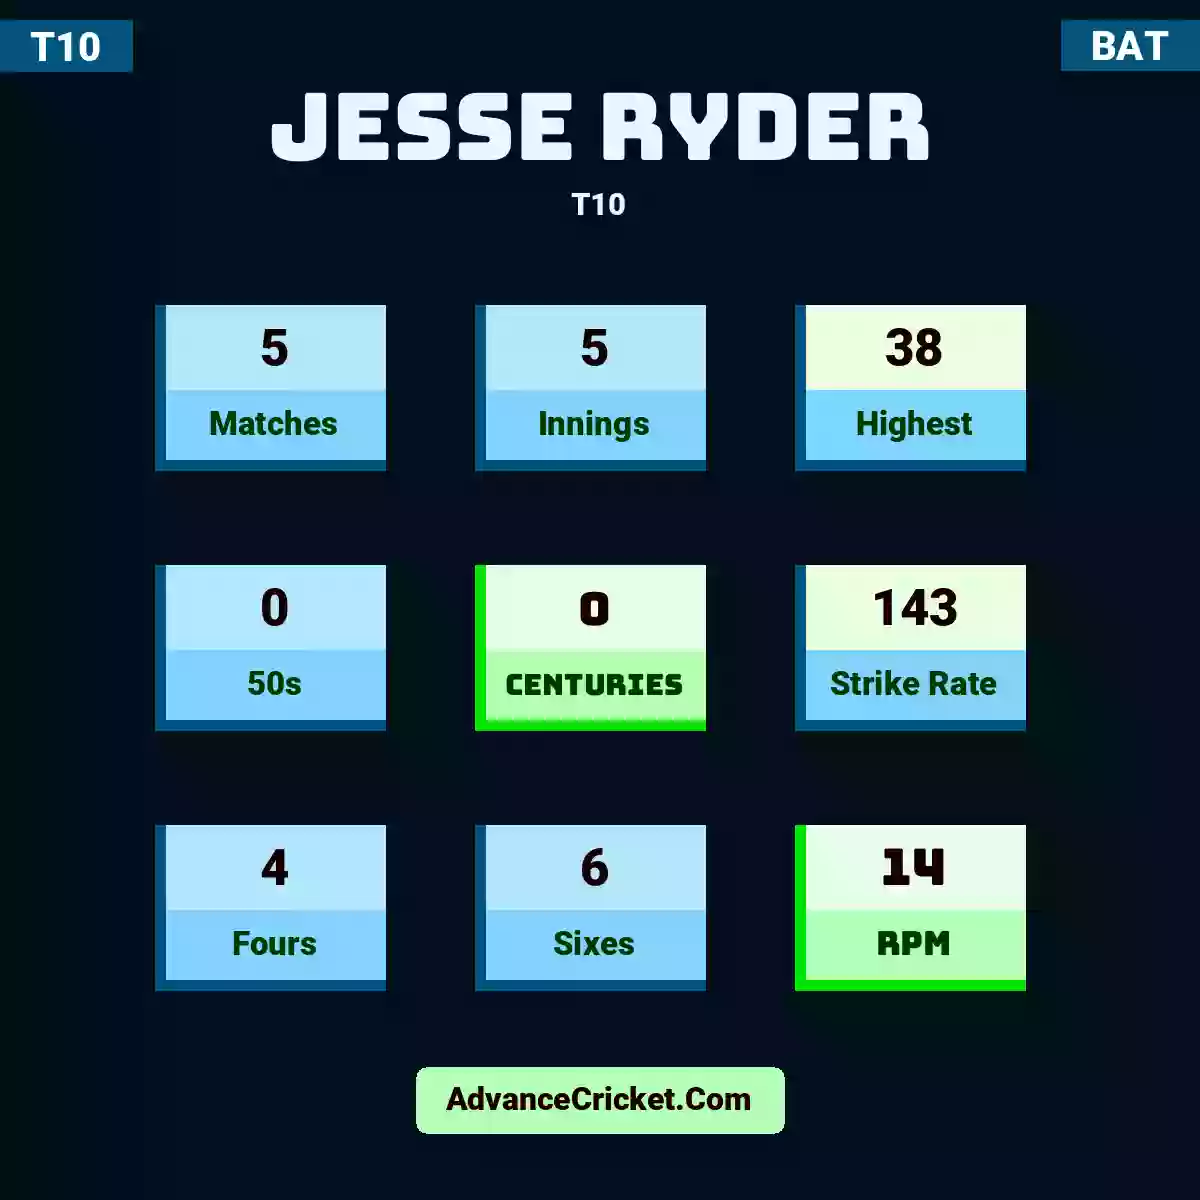 Jesse Ryder T10 , Jesse Ryder played 5 matches, scored 38 runs as highest, 0 half-centuries, and 0 centuries, with a strike rate of 143. J.Ryder hit 4 fours and 6 sixes, with an RPM of 14.